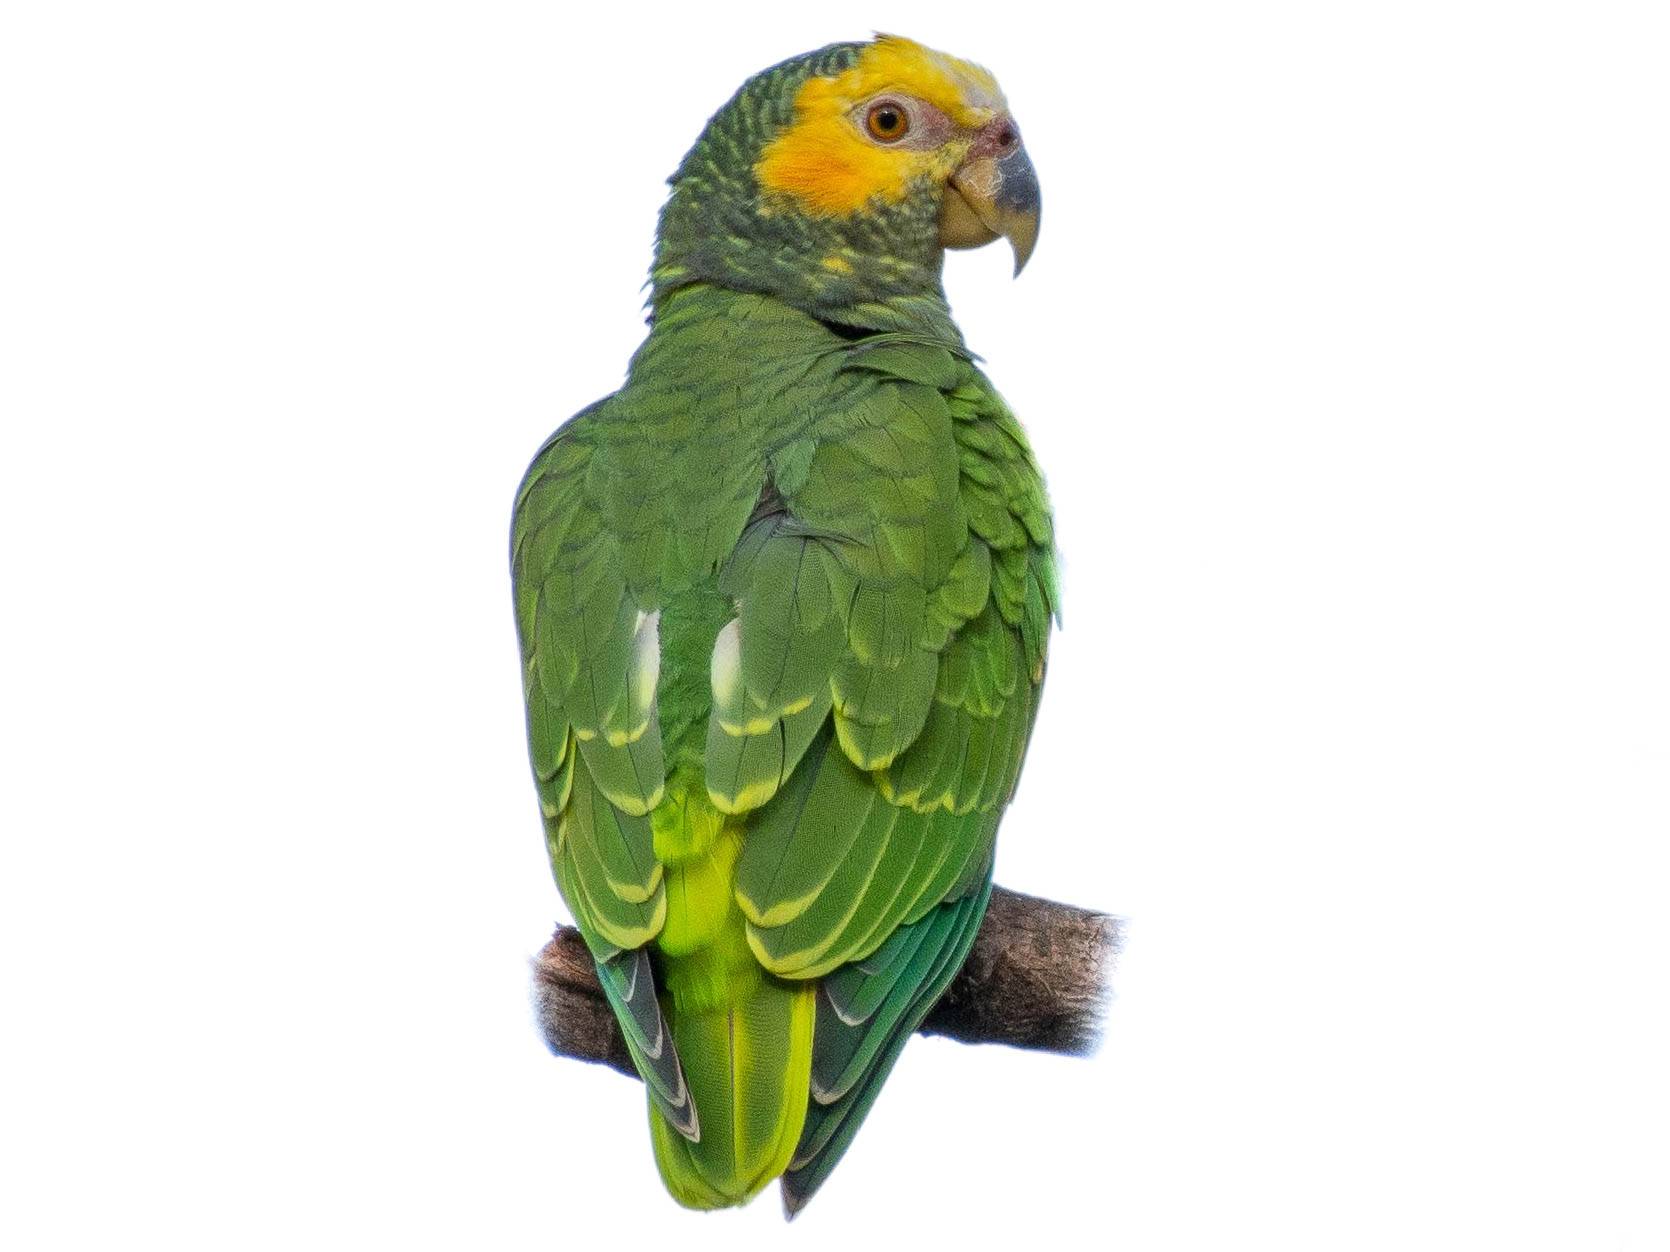 A photo of a Yellow-faced Parrot (Alipiopsitta xanthops)